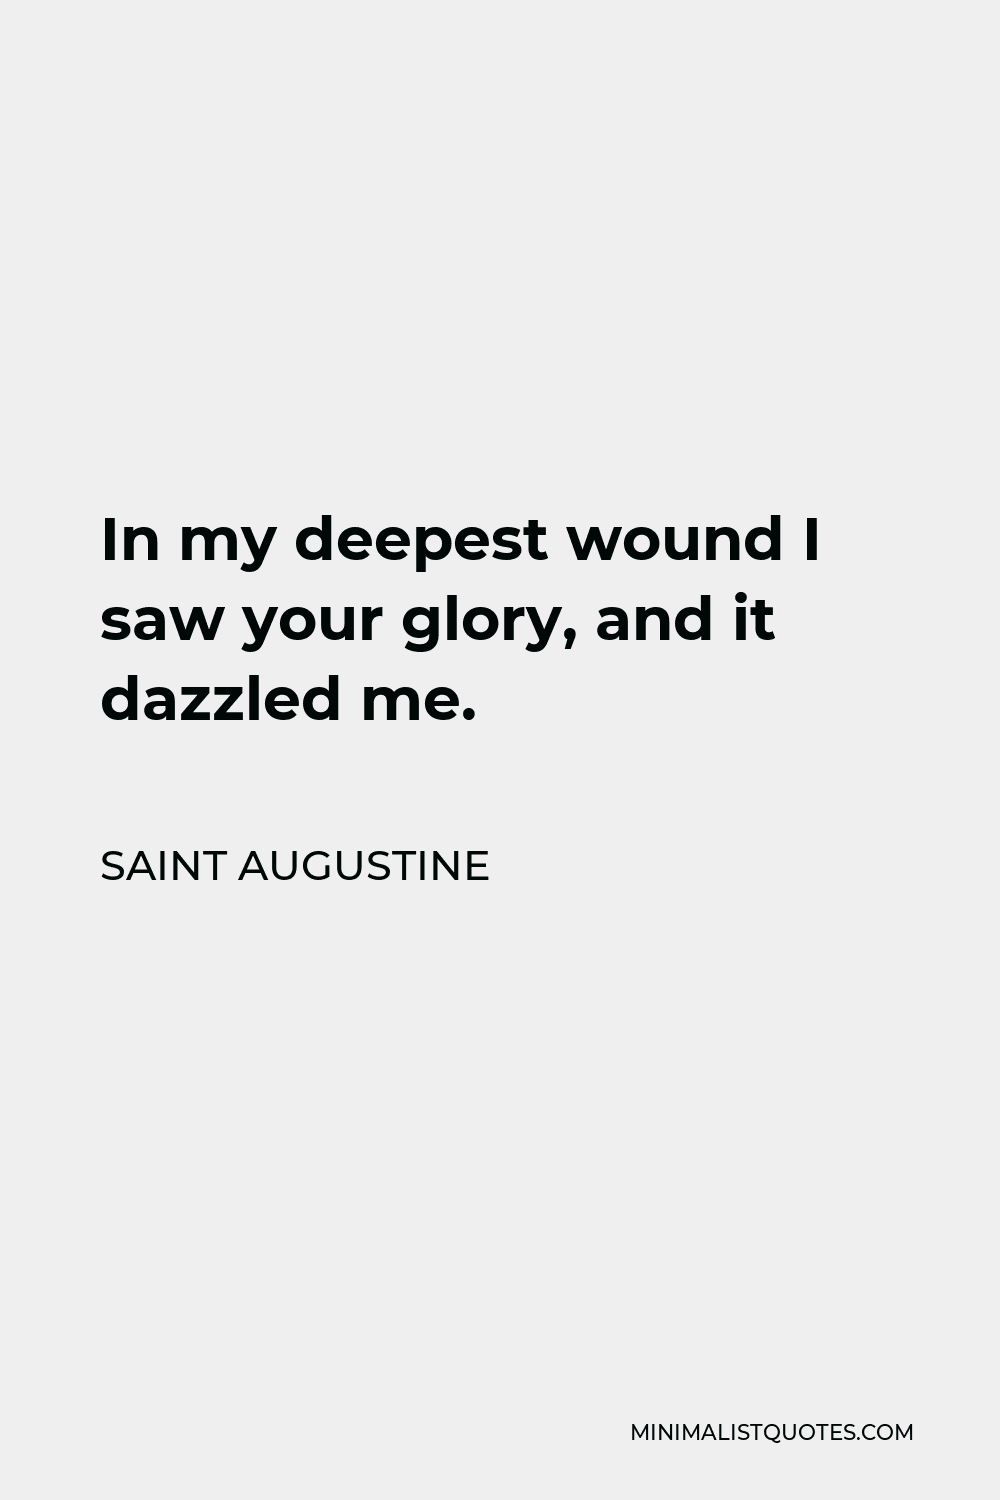 Saint Augustine Quote - In my deepest wound I saw your glory, and it dazzled me.